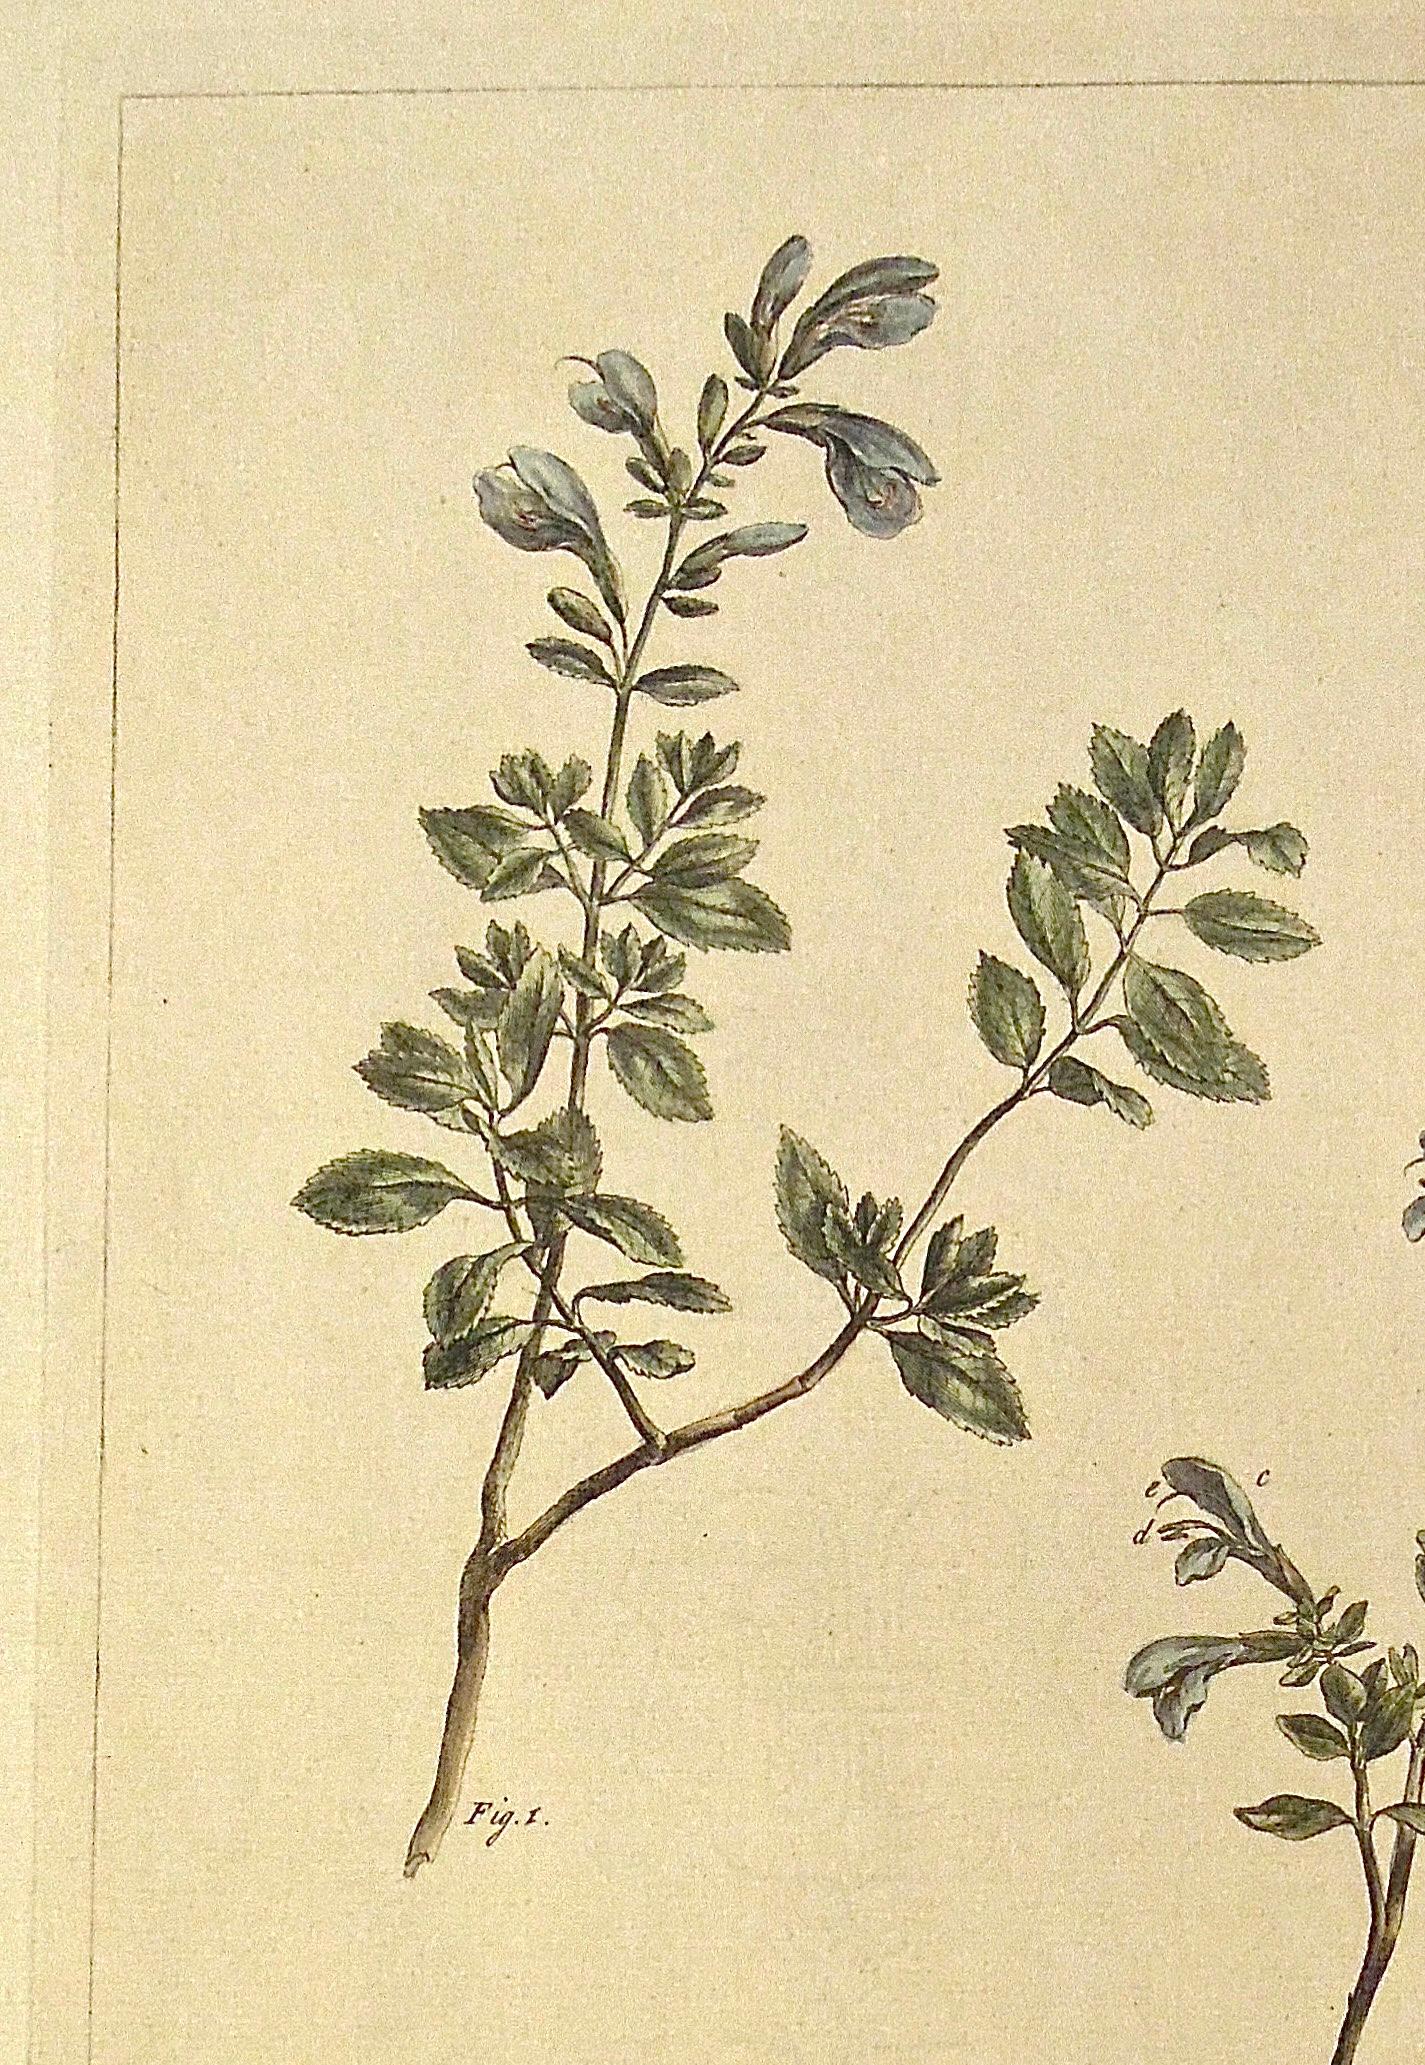 Salvia.
Upper Right: Pl. CCXXV. Lower Left: I. Miller delin et Sculp. Lower Center: Publish'd according to Act of Parliament by P Miller April 21. 1758.
Author: Philip Miller
Source / Publication: The Gardener's Dictionary
Publisher: Printed for the